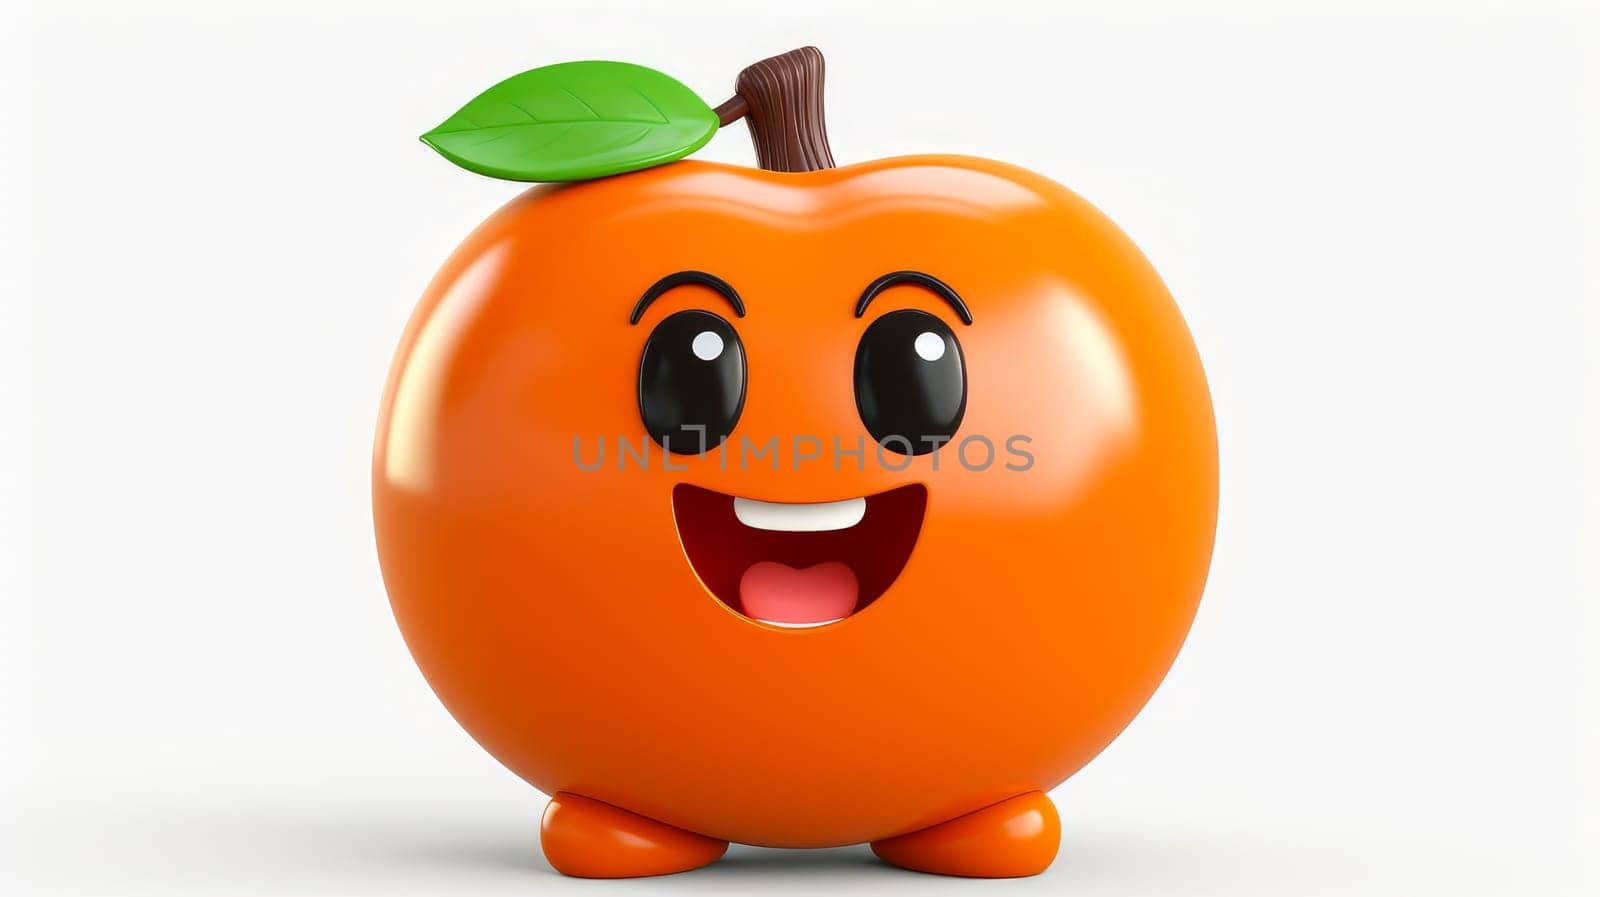 Persimmon with a cheerful face 3D on a white background. Cartoon characters, three-dimensional character, healthy lifestyle, proper nutrition, diet, fresh vegetables and fruits, vegetarianism, veganism, food, breakfast, fun, laughter, banner